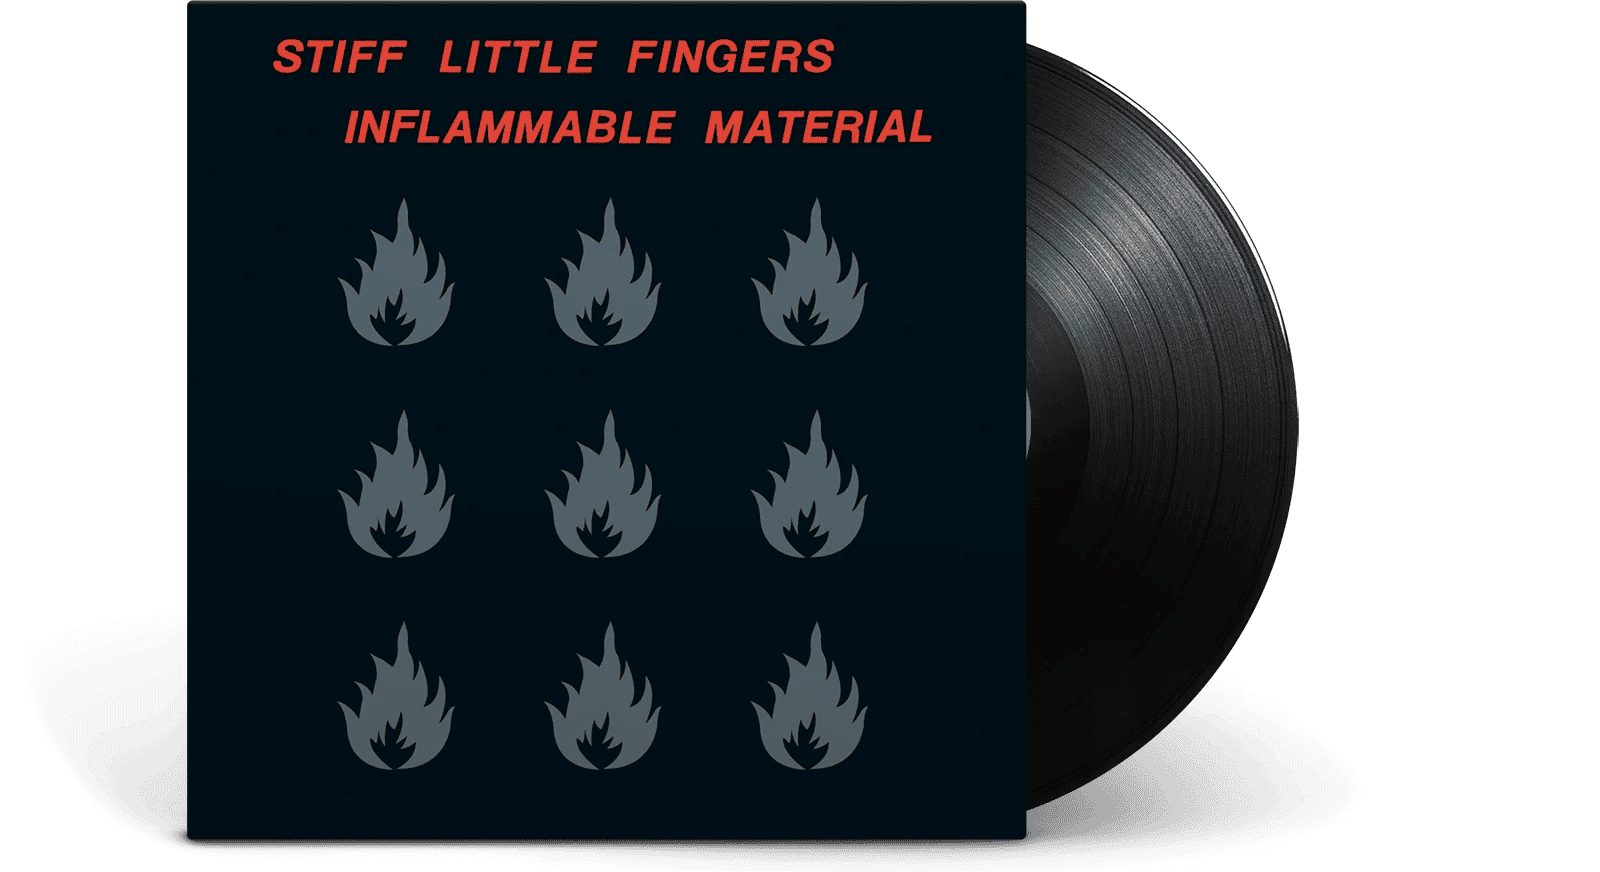 STIFF LITTLE FINGERS - Inflammable Material Vinyl